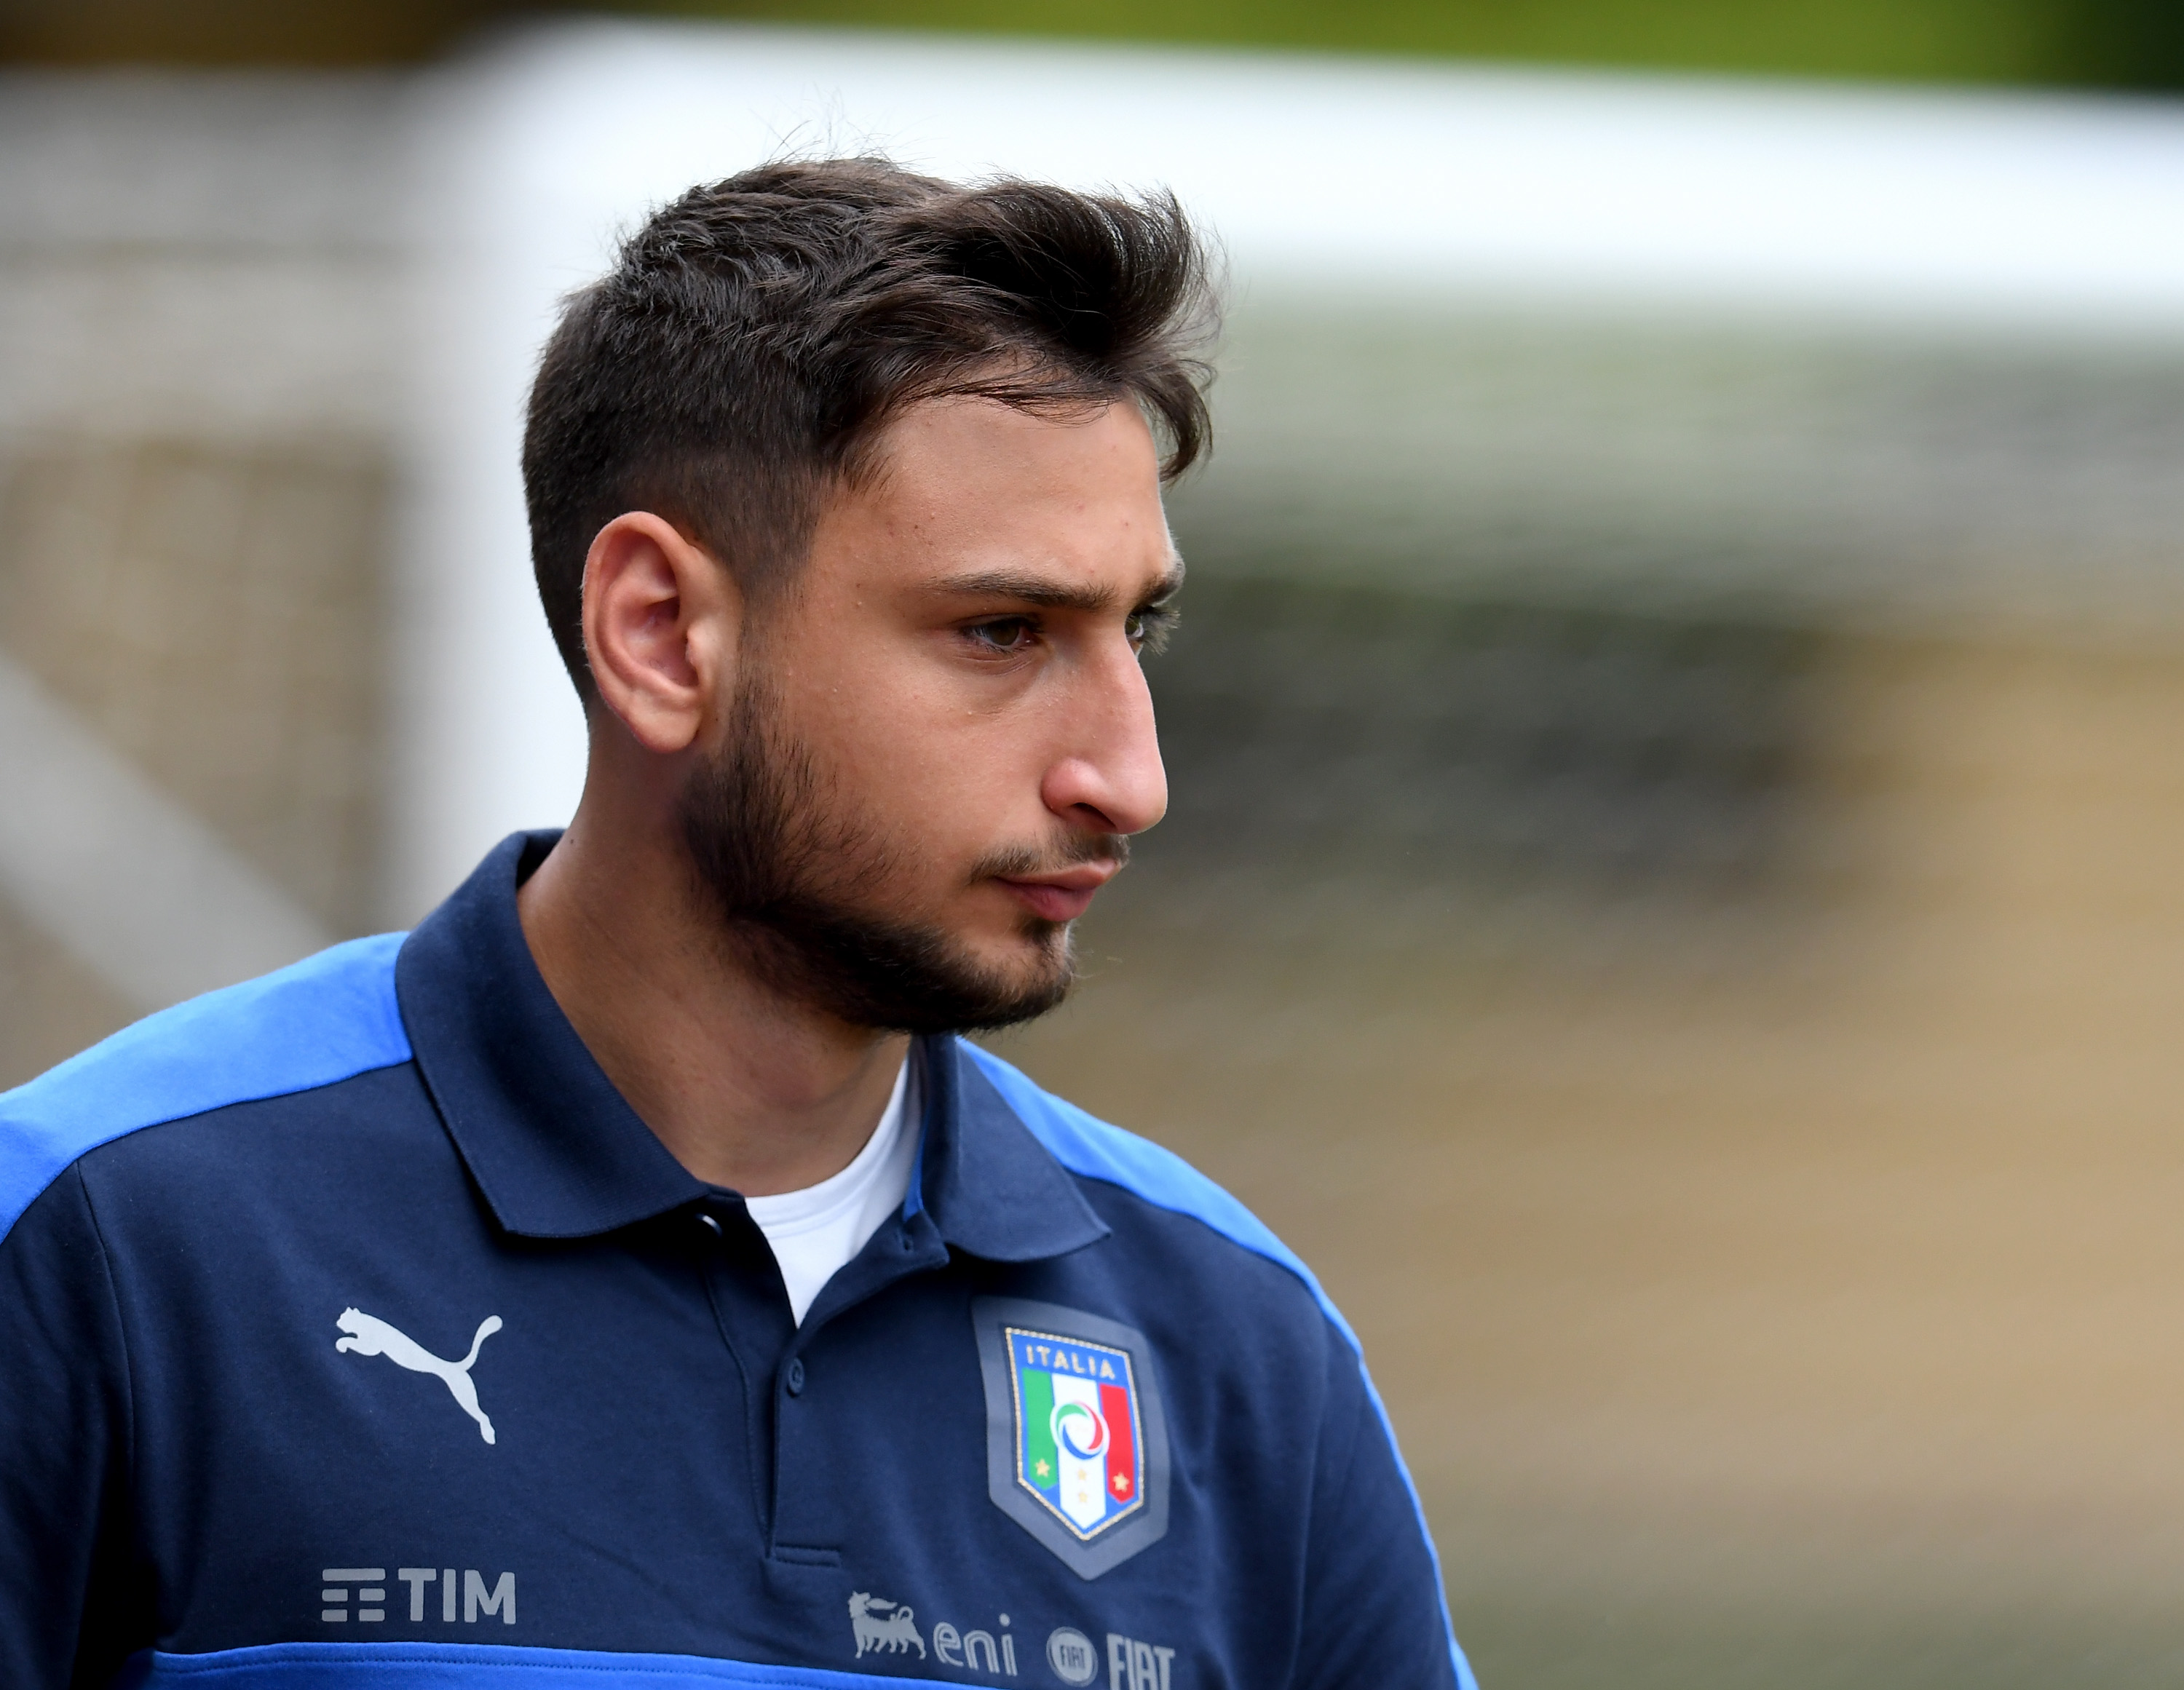 FLORENCE, ITALY - JUNE 05:  Gianluigi Donnarumma  of Italy looks on prior to the training session at Coverciano at Coverciano on June 05, 2017 in Florence, Italy.  (Photo by Claudio Villa/Getty Images)